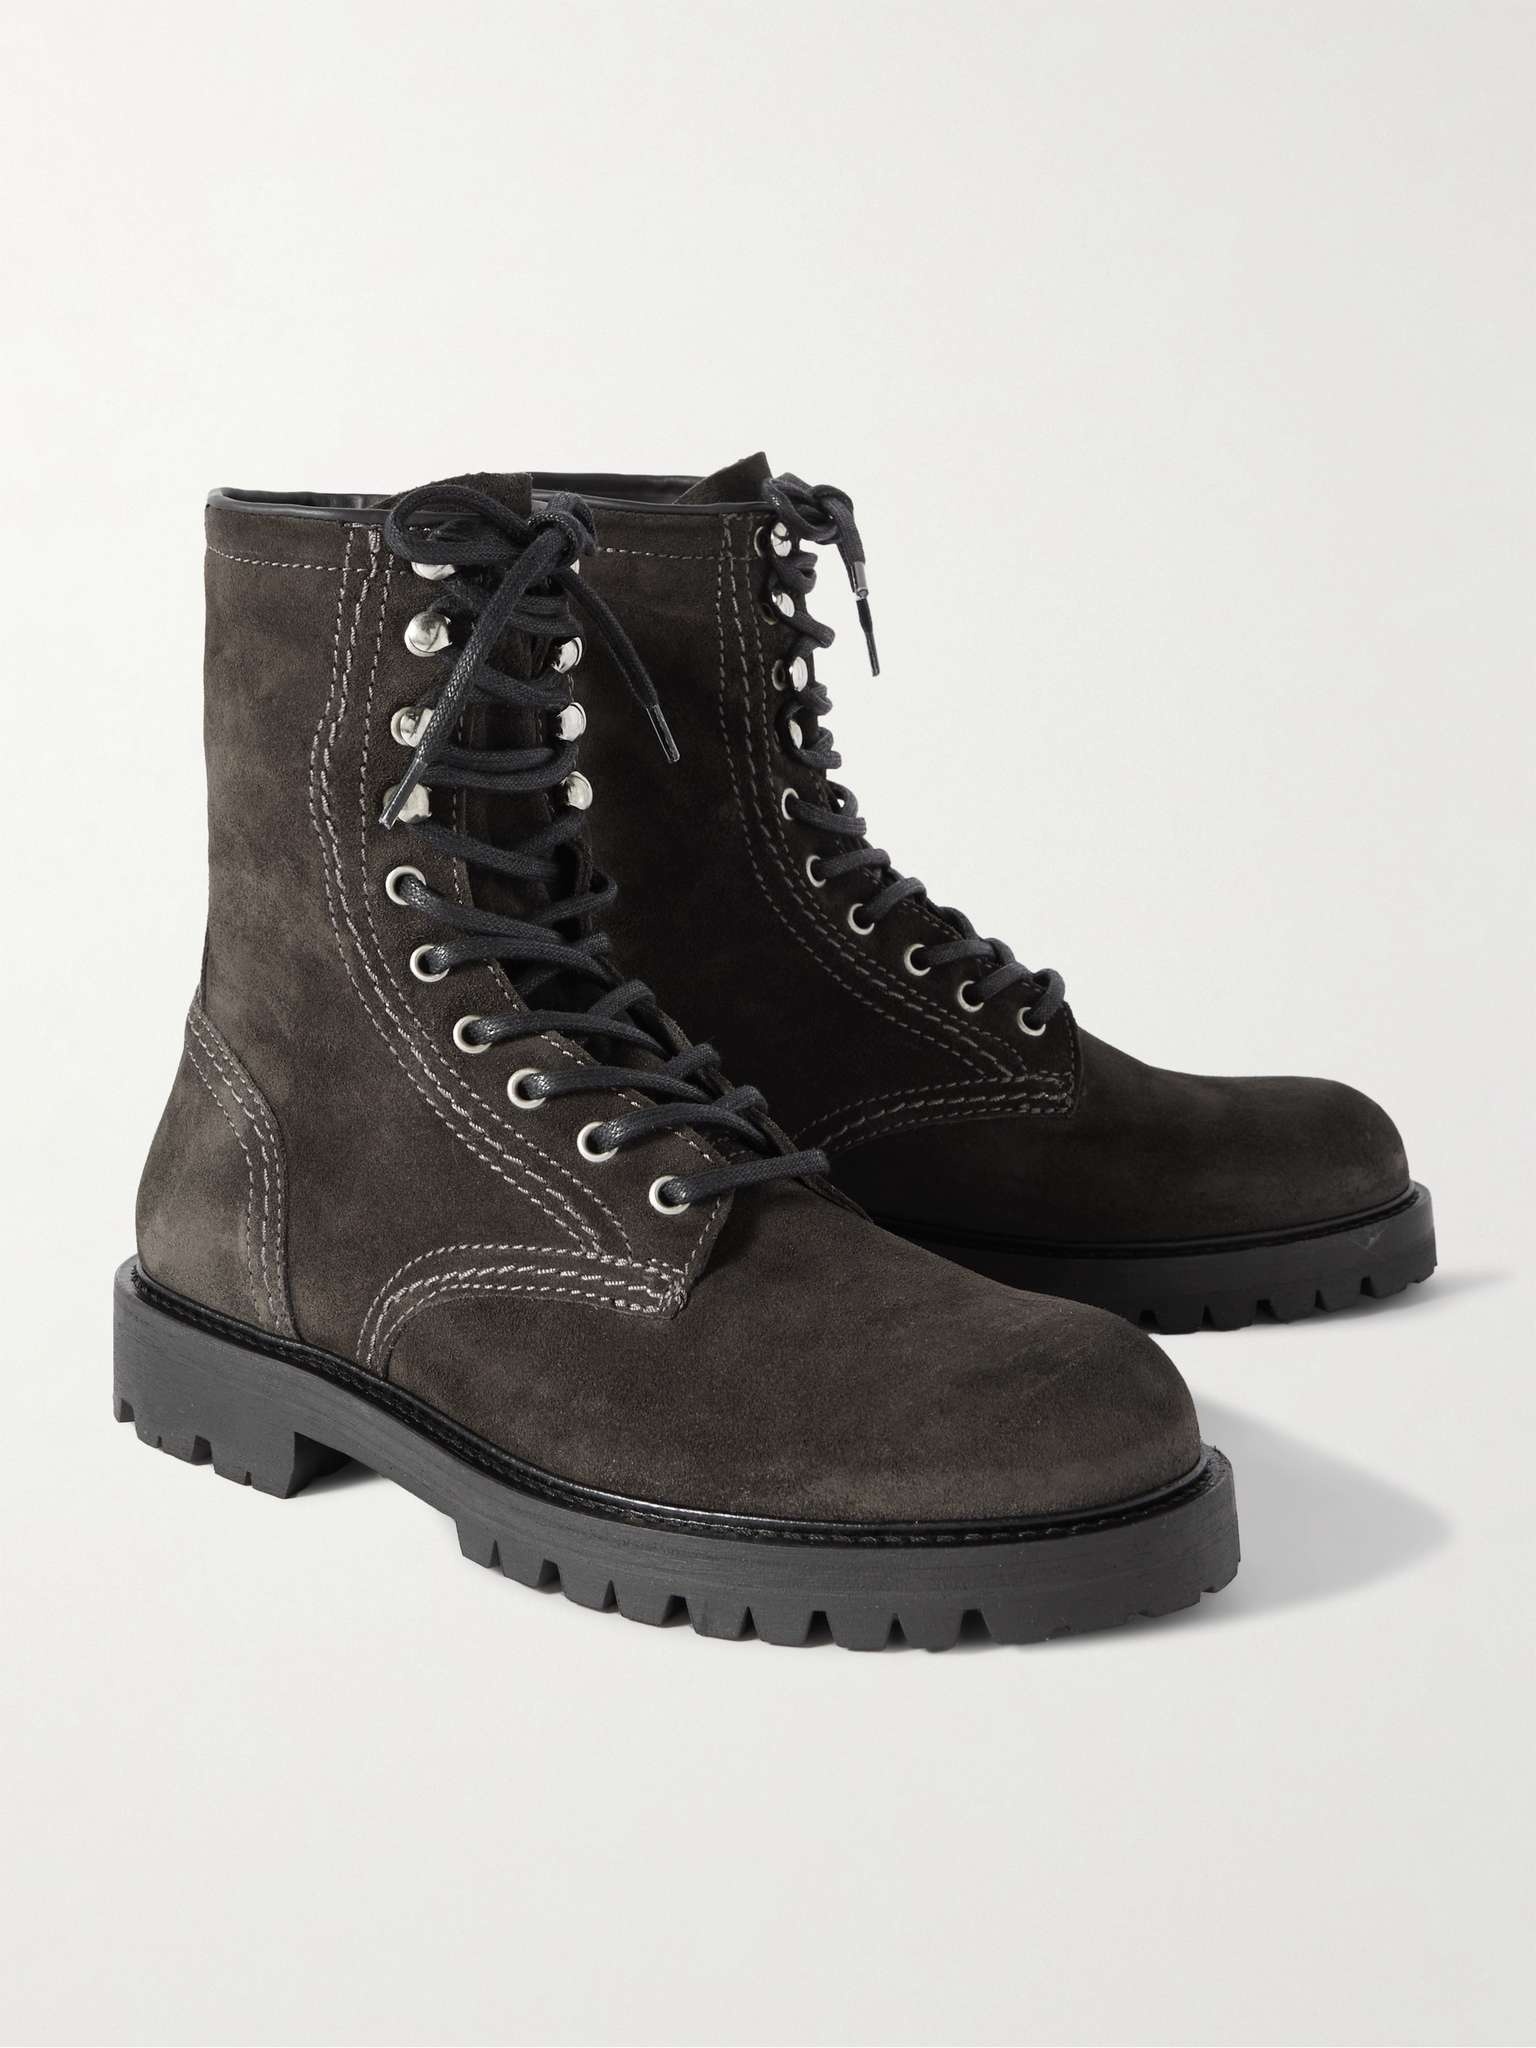 Marshall Suede Boots - 4